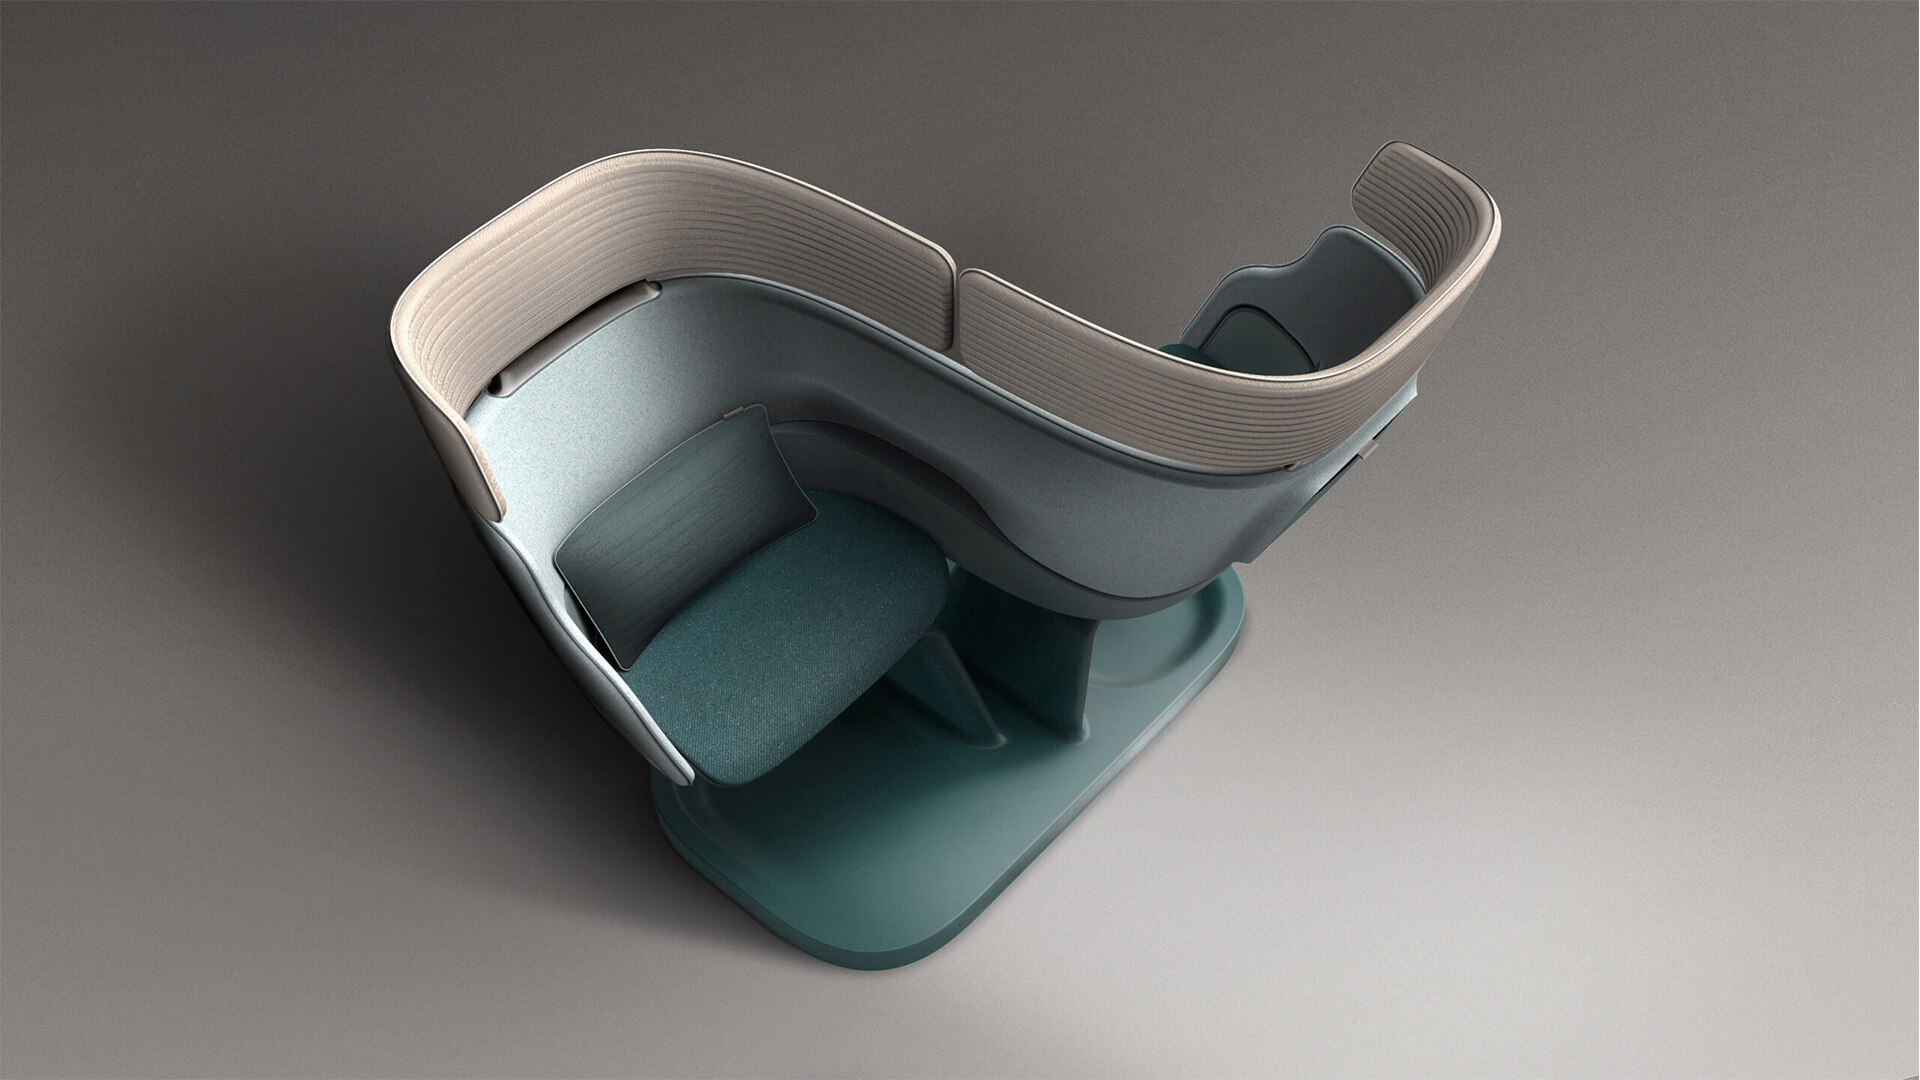 LAYER introduces Joyn, a greener way, near-future concept to travel